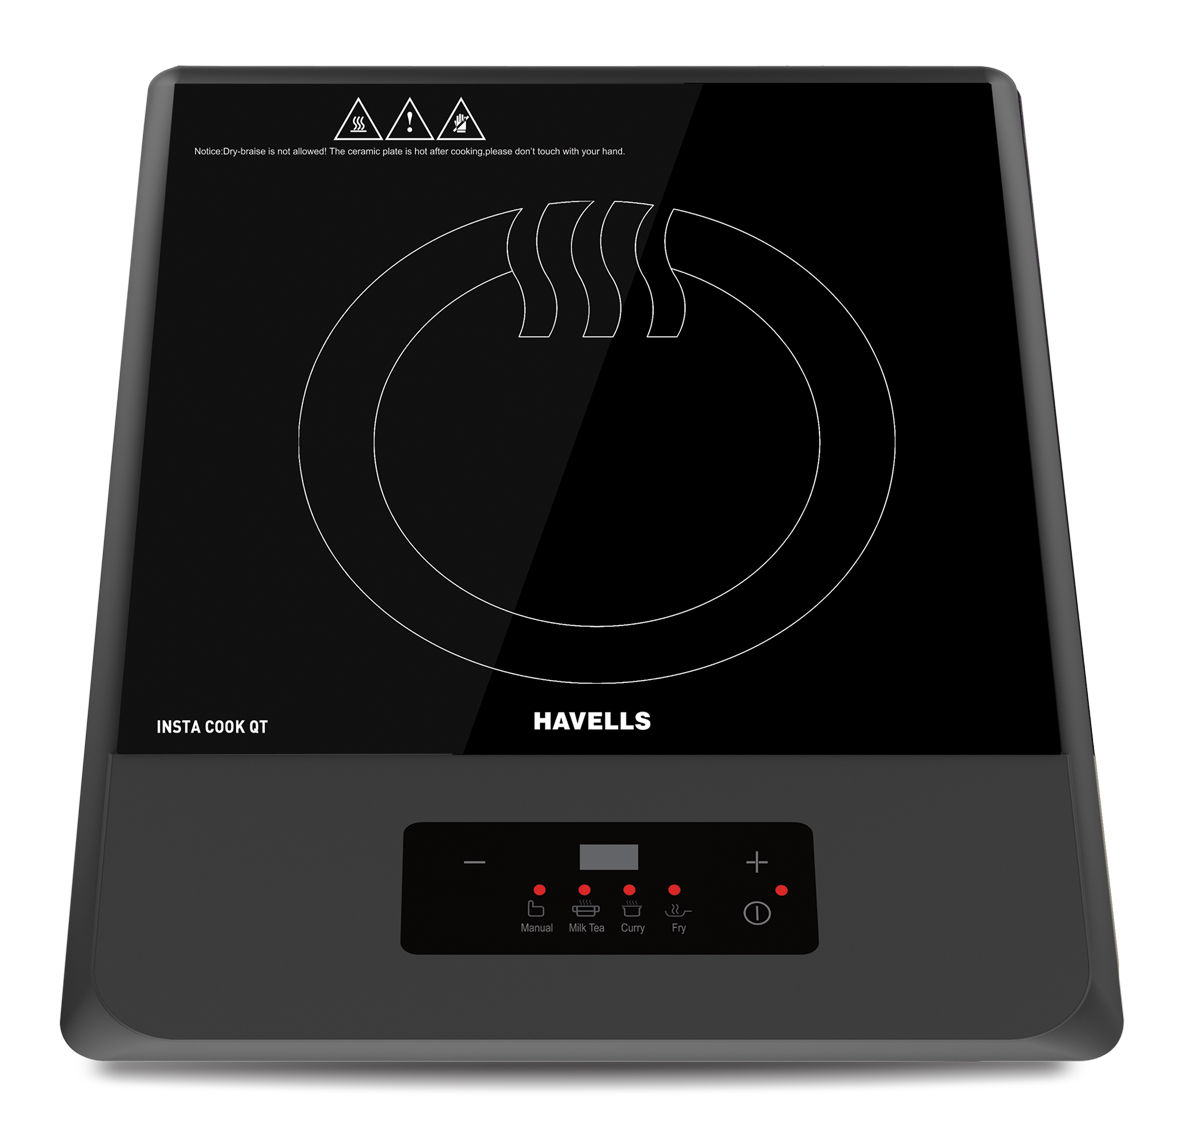 Havells Insta Cook QT 1200 W Induction Cooker